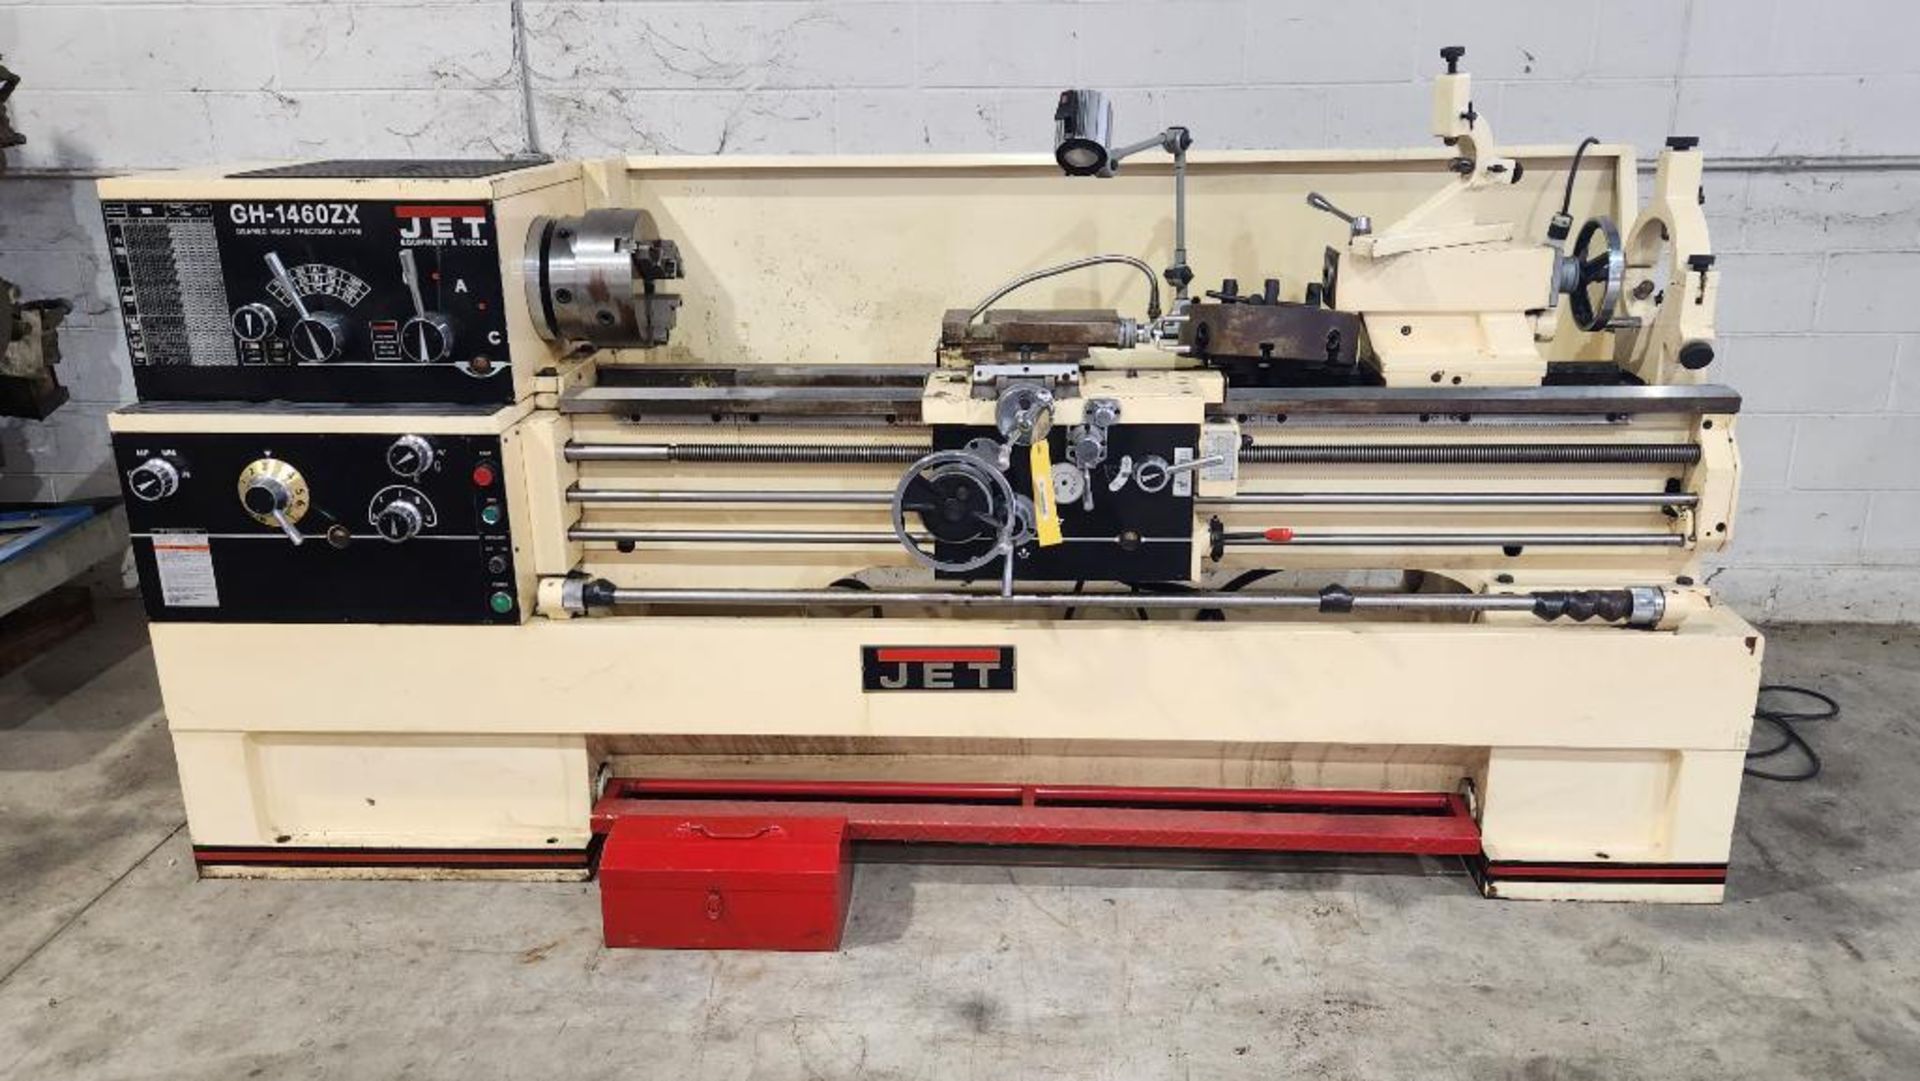 Jet Geared Head Precision Lathe, Model GH-1460ZX, S/N 000821ZX204, 230V/460V, 3-Phase